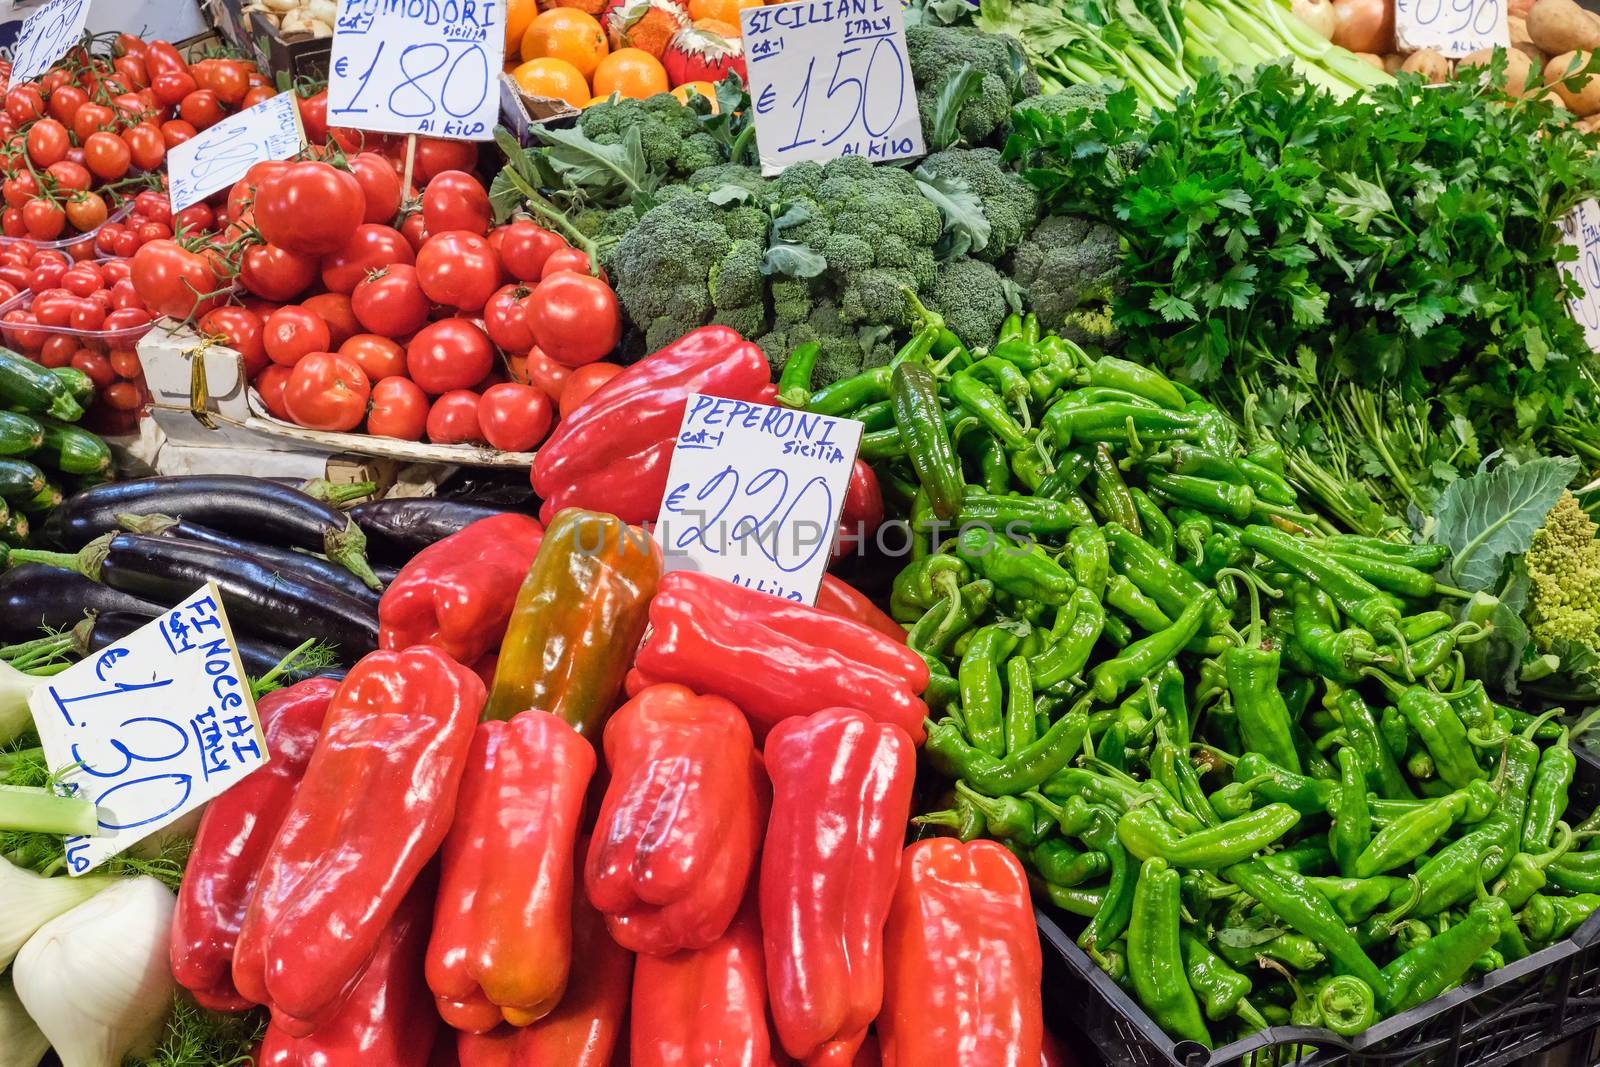 Different kinds of vegetables for sale at a market in Italy